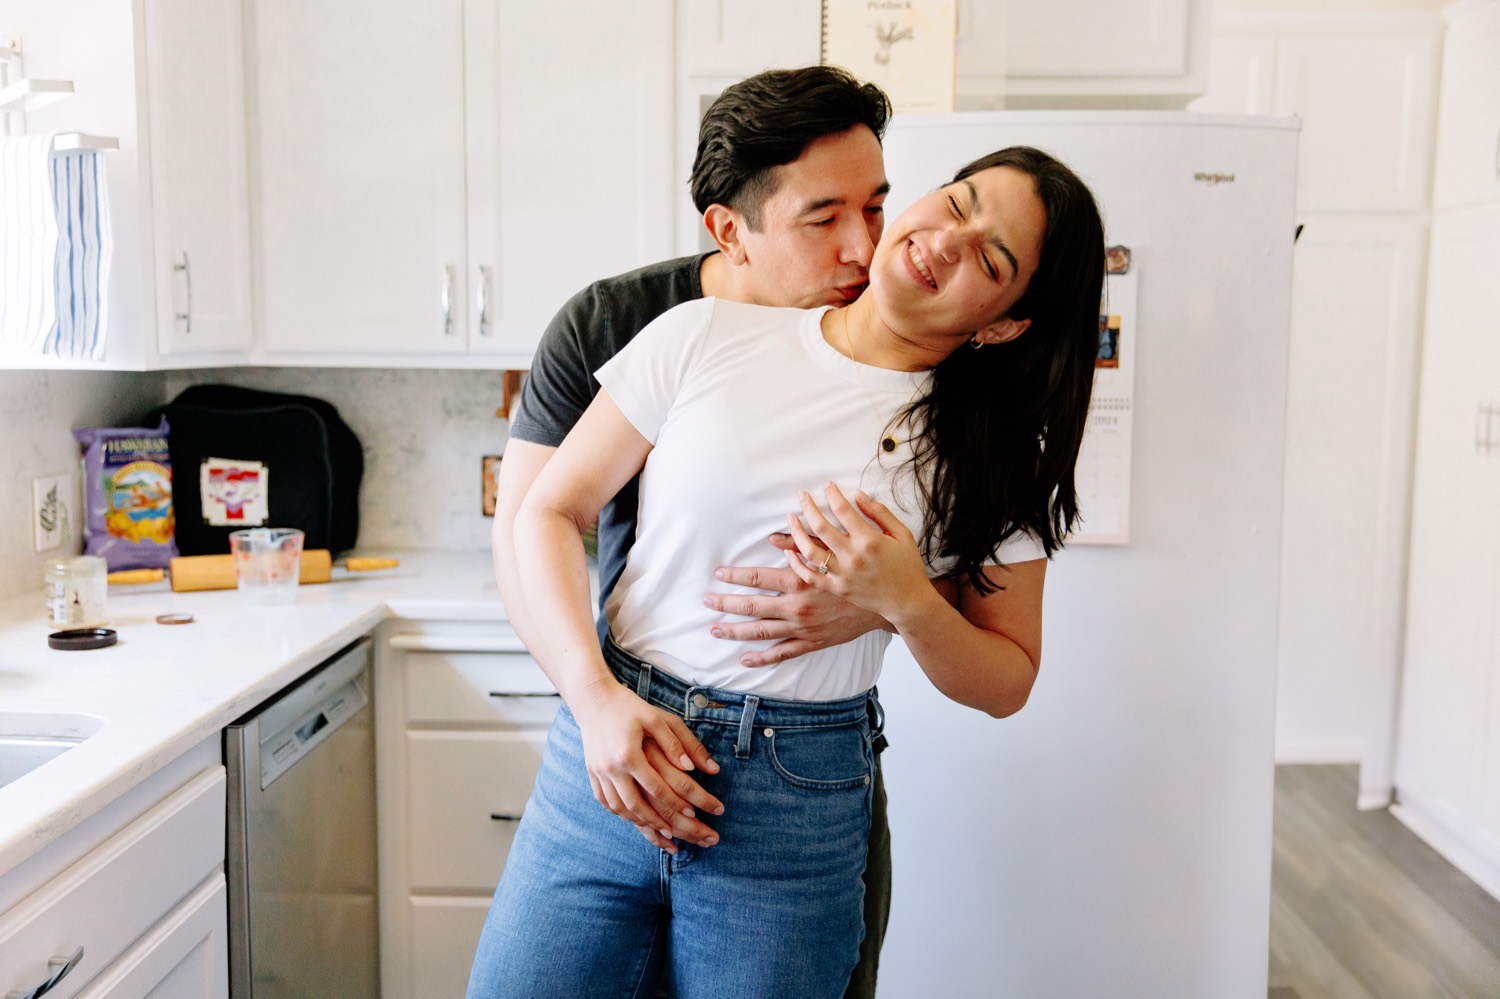 engagement photos by Magaly Barajas Los Angeles